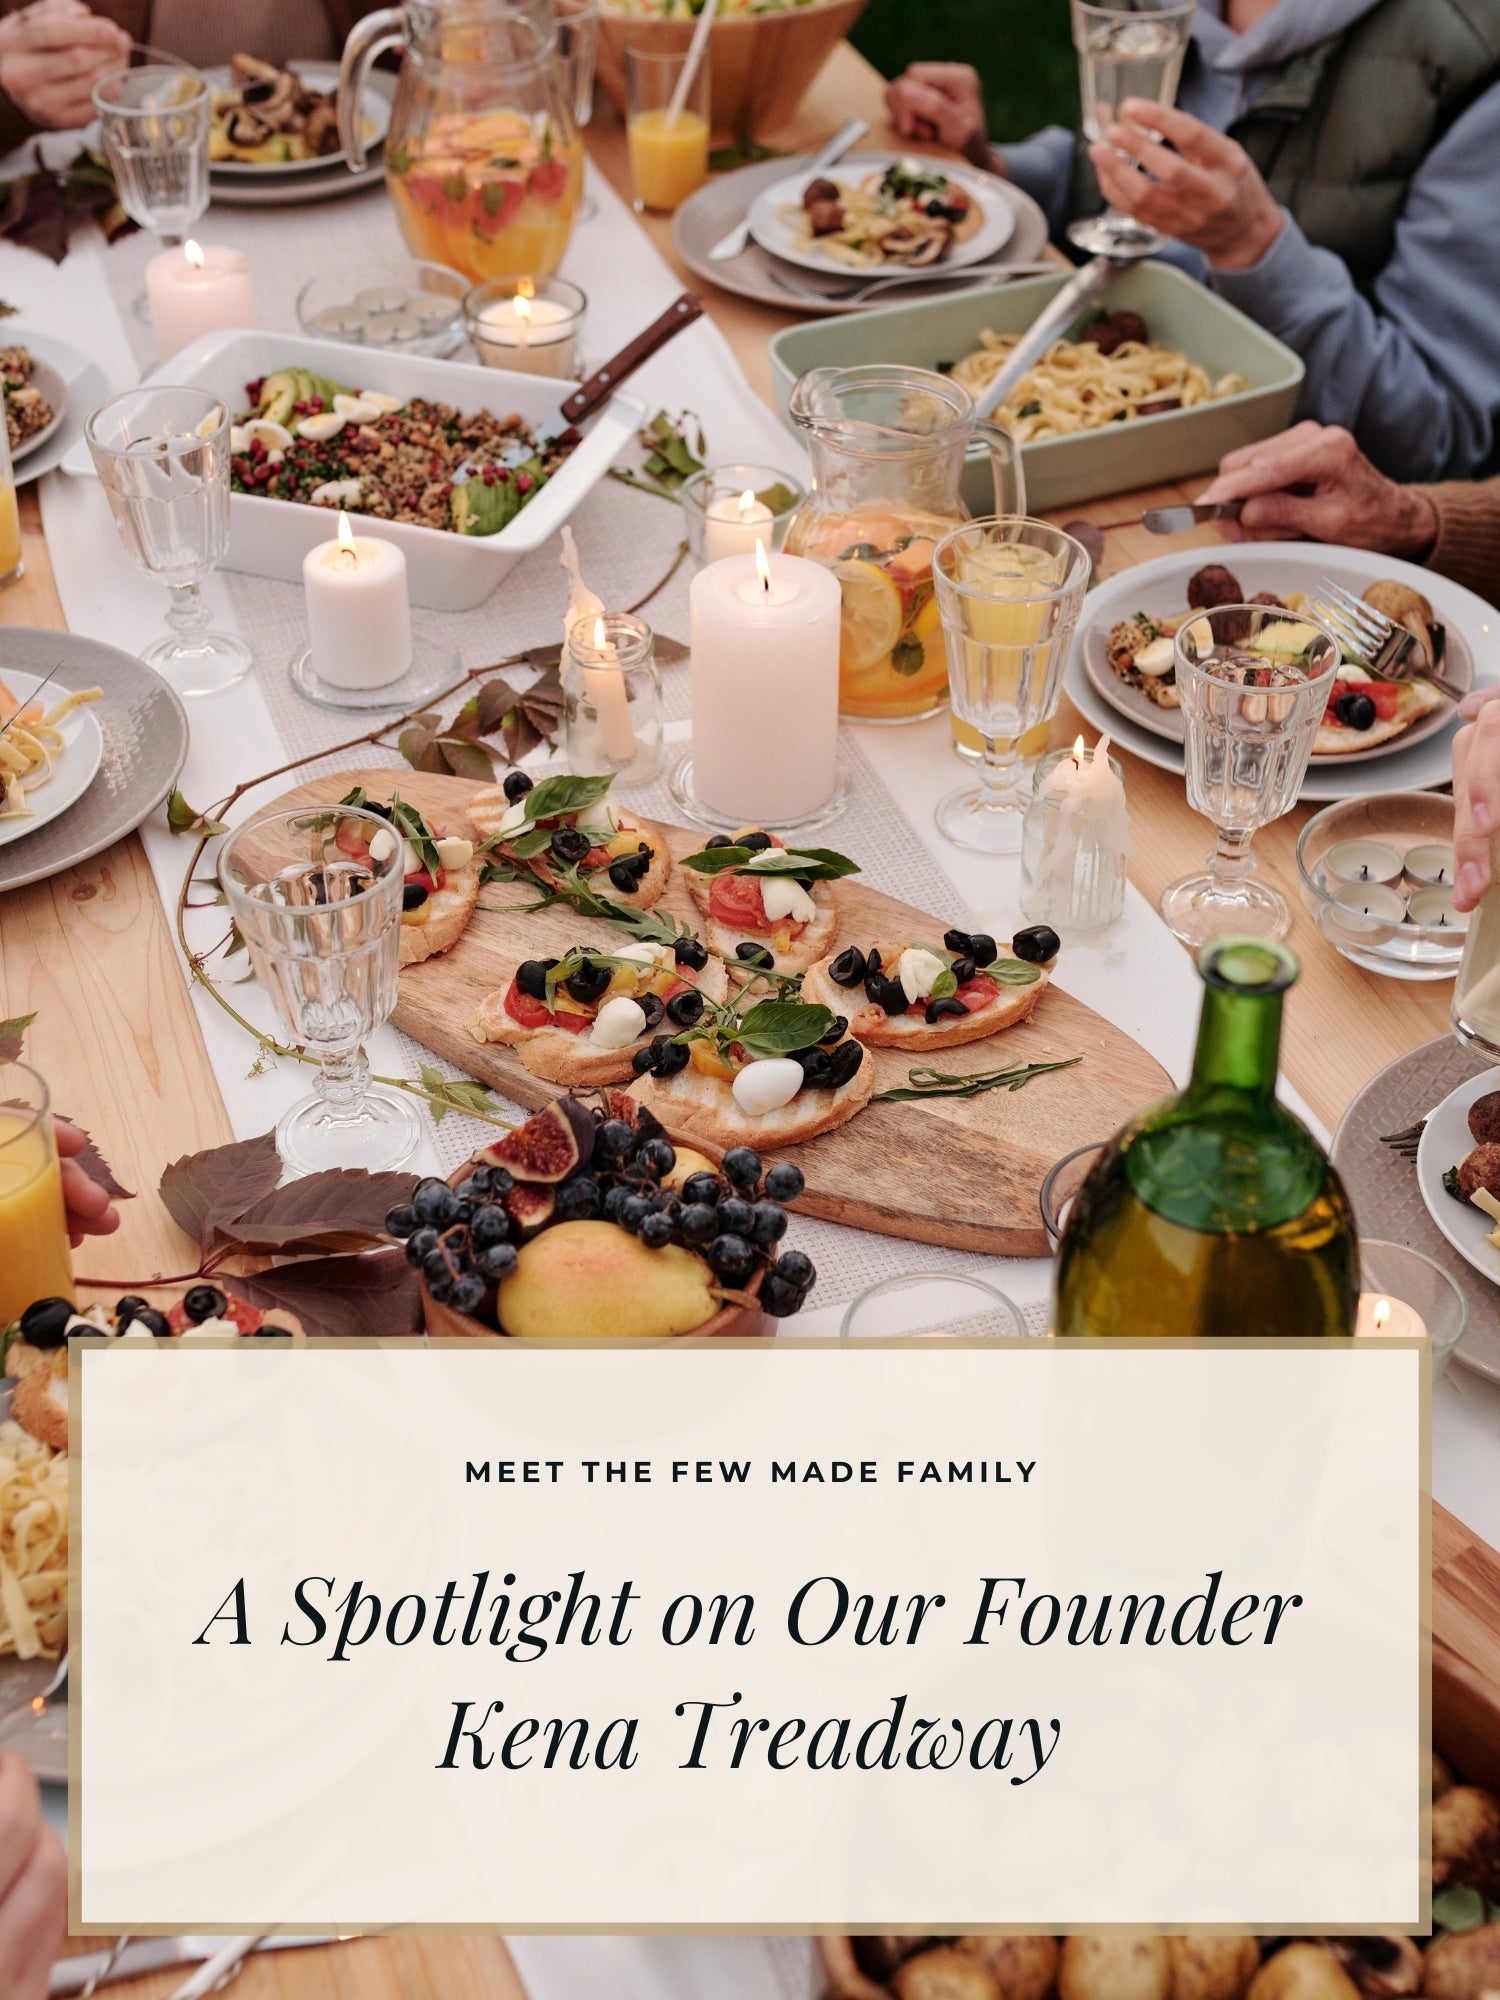 Meet the Few Made Family: A Spotlight On Our Founder, Kena Treadway